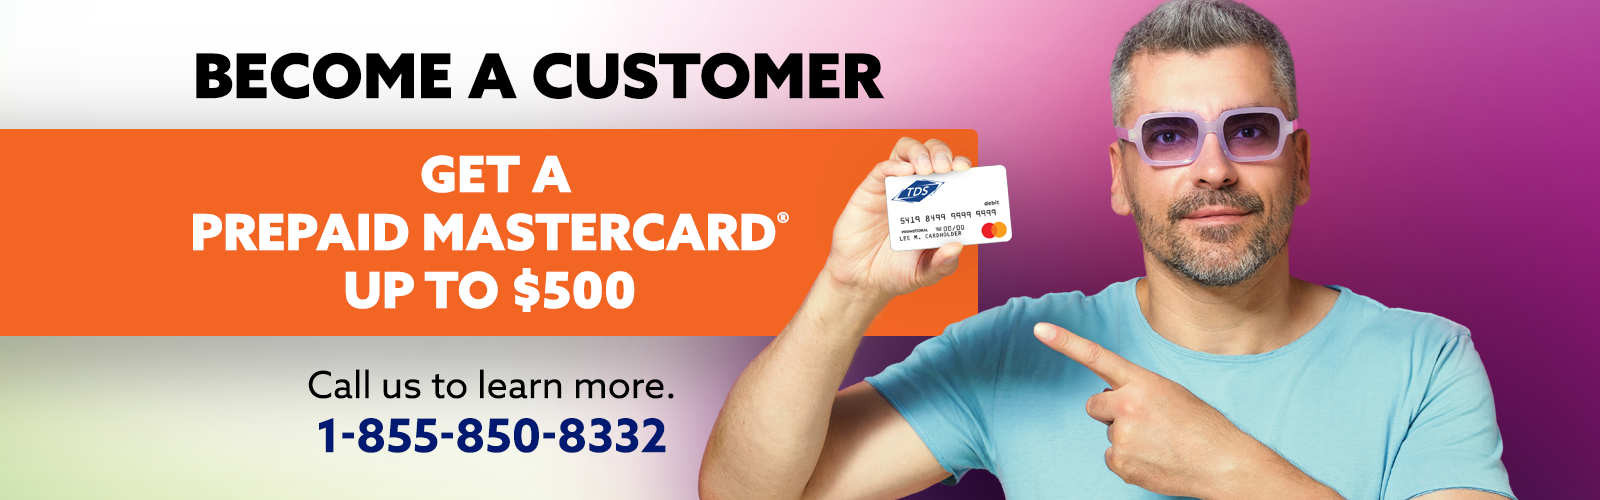 Add TDS TV+ and get a prepaid Mastercard up to $200. Call 1-855-850-8332 to learn more.